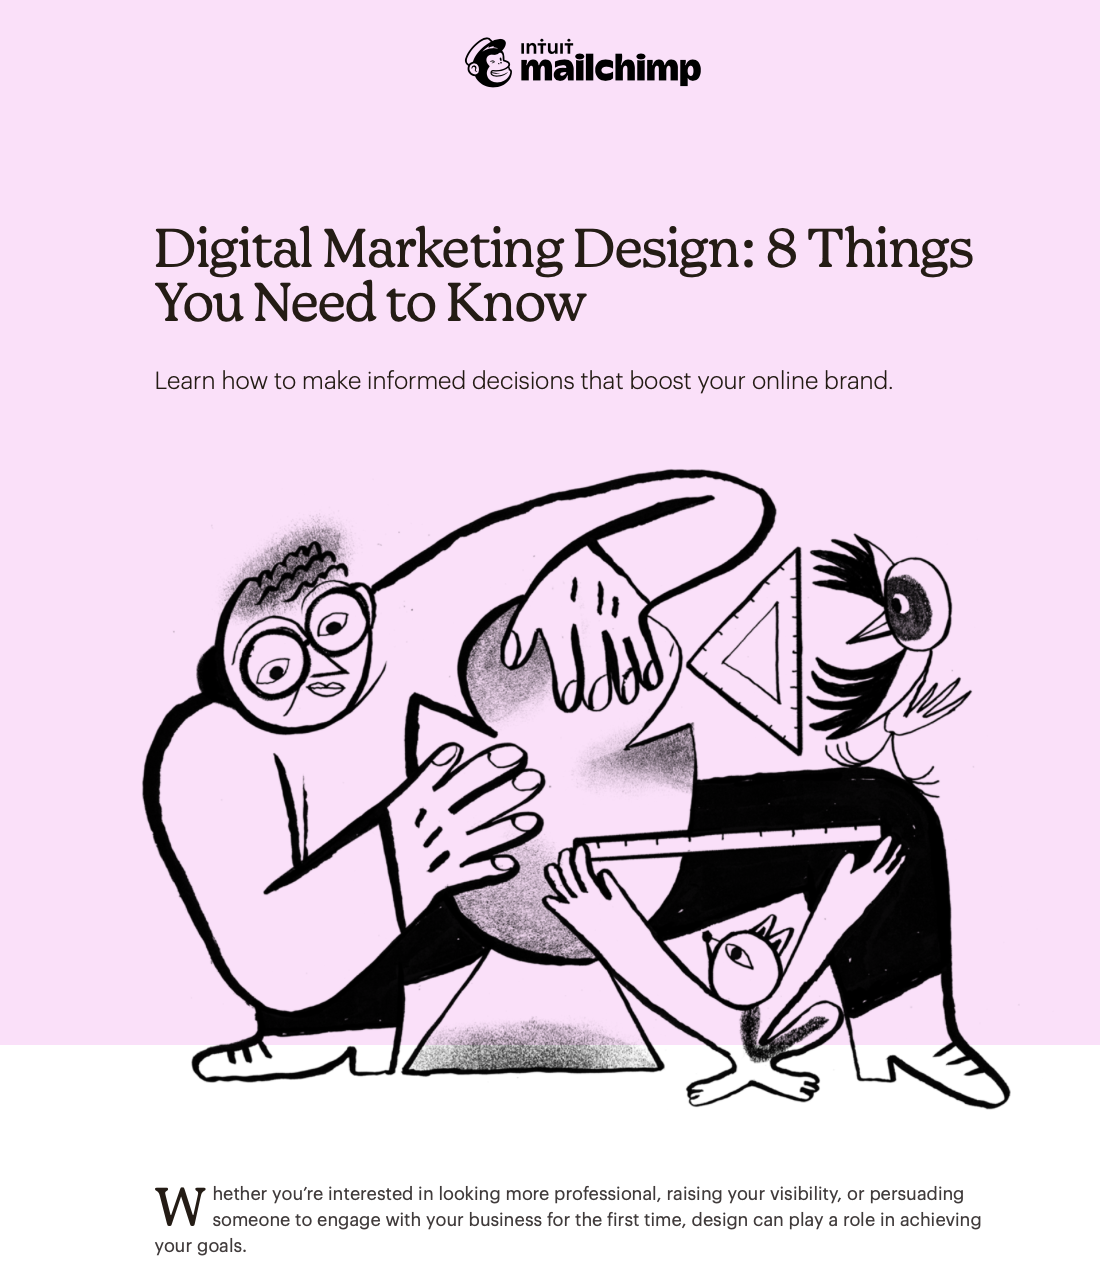 "Digital Marketing Design: 8 Things You Need to Know" (Mailchimp)